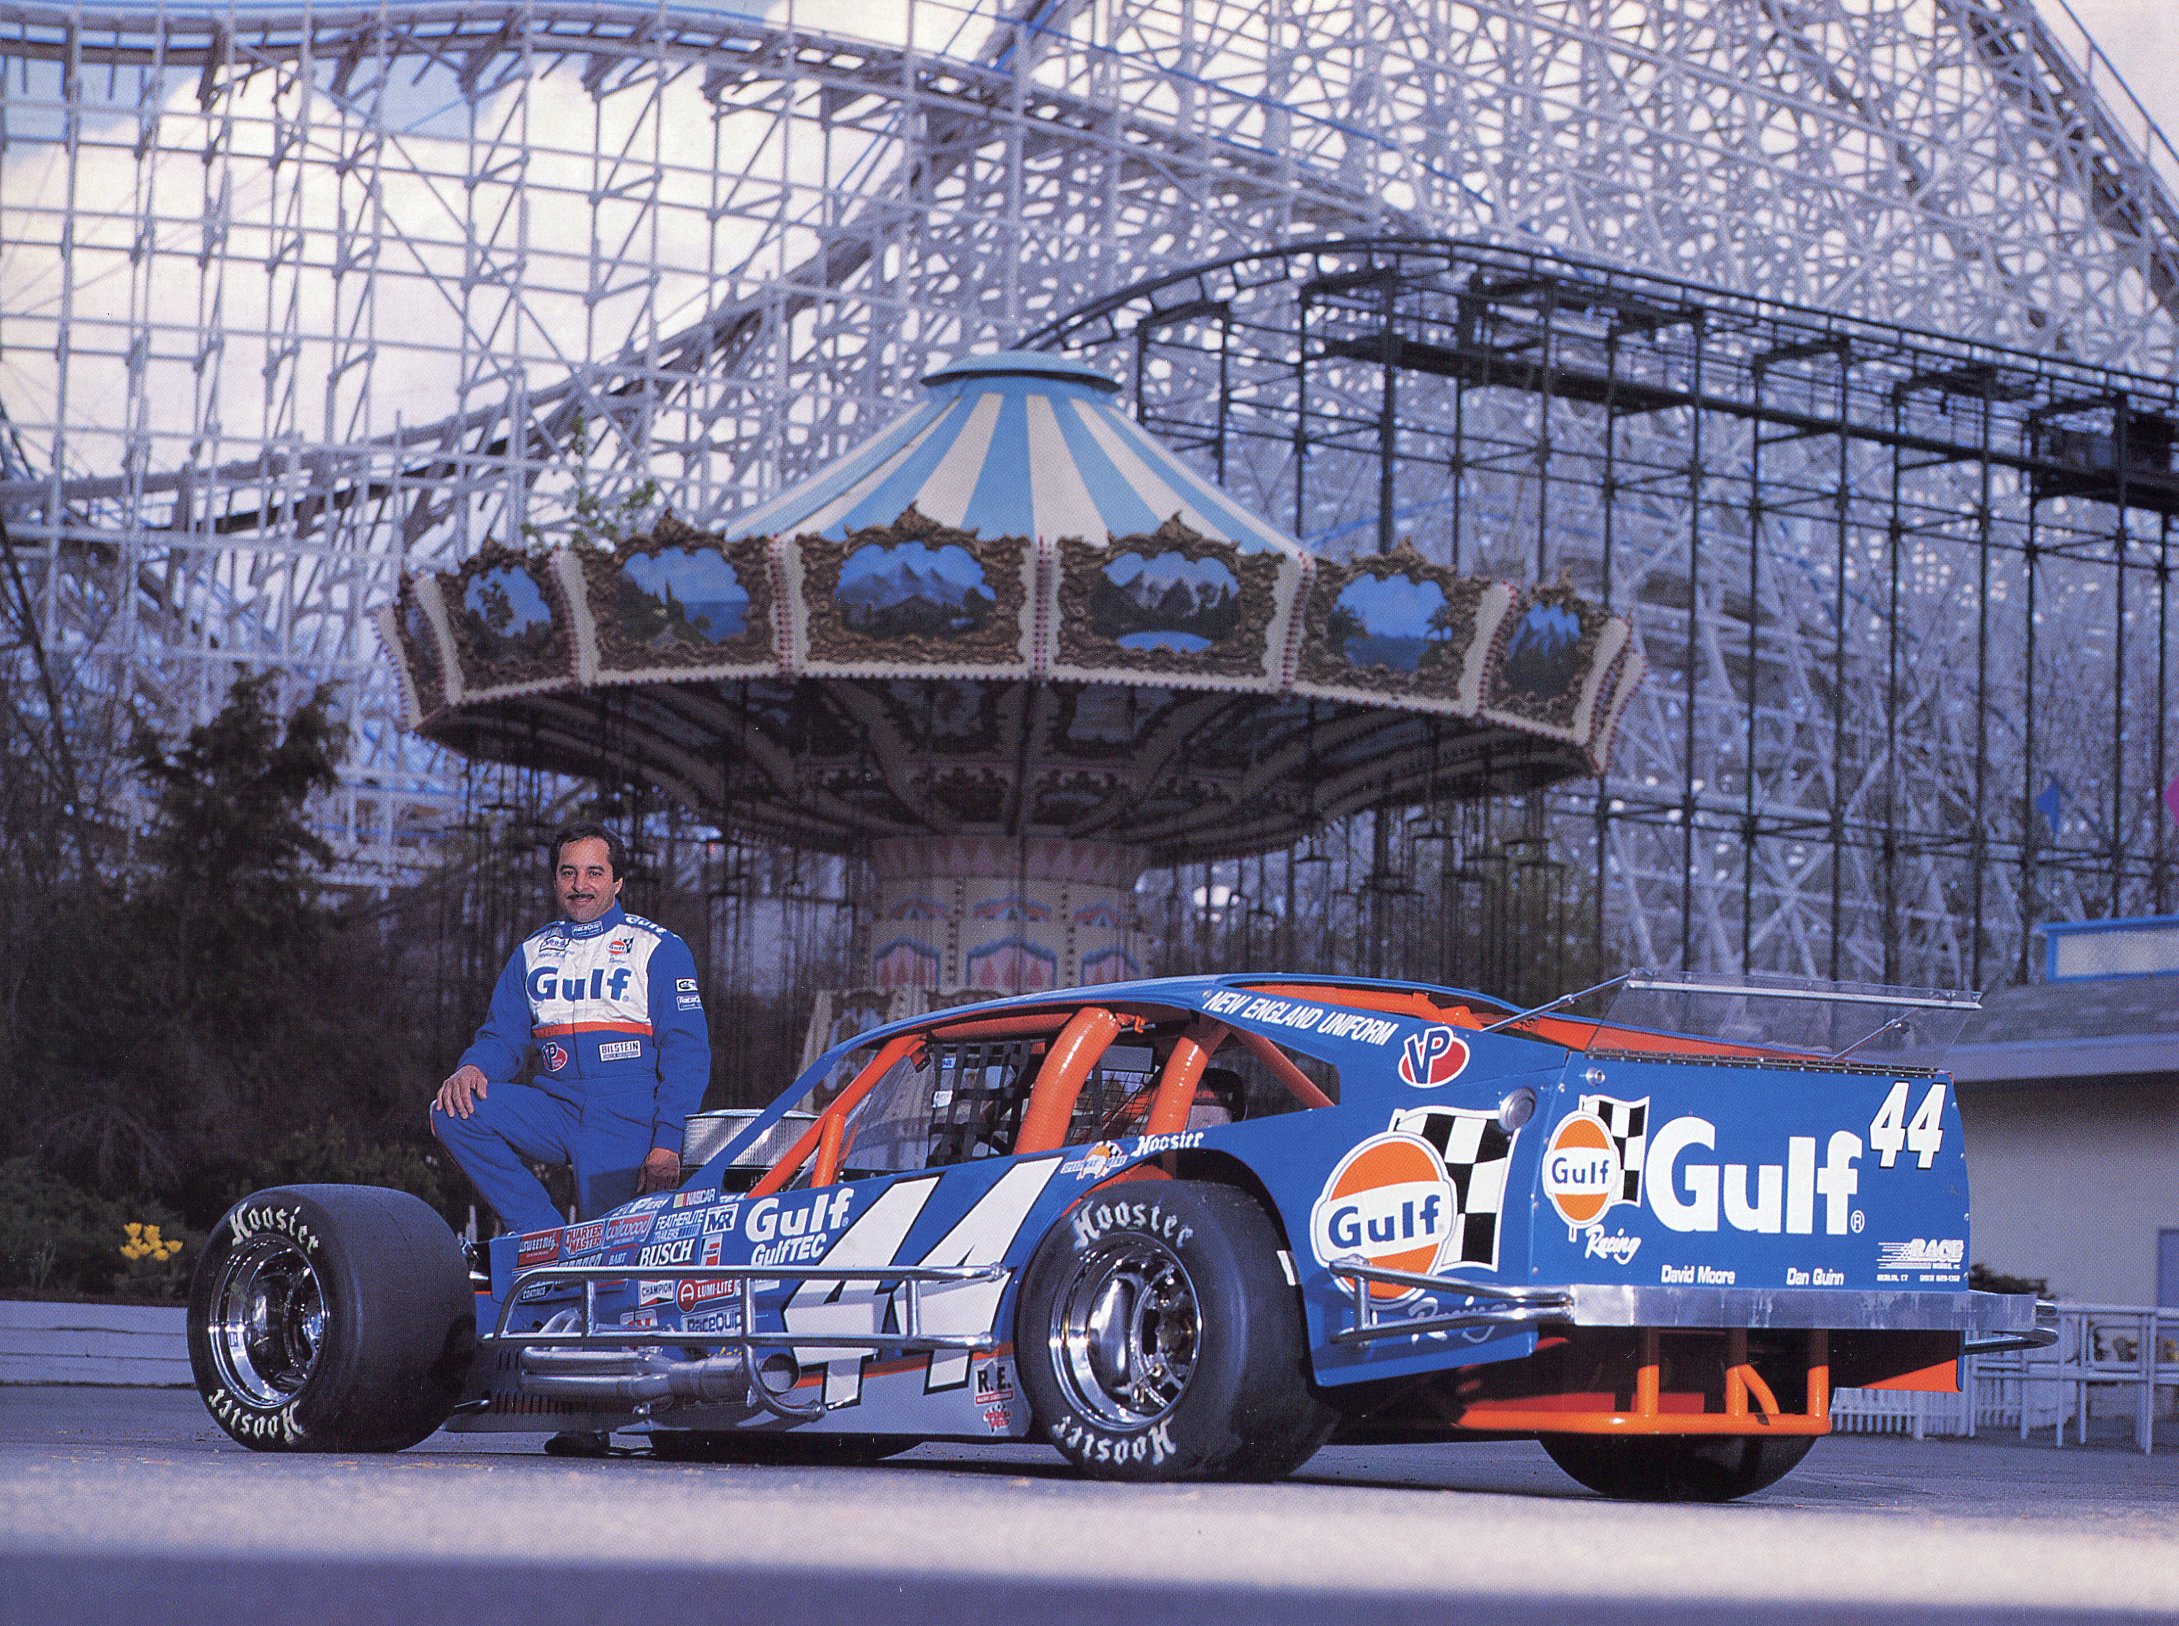 Reggie Ruggiero poses with the No. 44 car, owned by Agawam's Mario Fiore, at Riverside Park prior to the 1996 NASCAR Modified Tour season. Both Ruggiero and Fiore will be inducted Jan. 29 into the New England Antique Racers Hall of Fame.